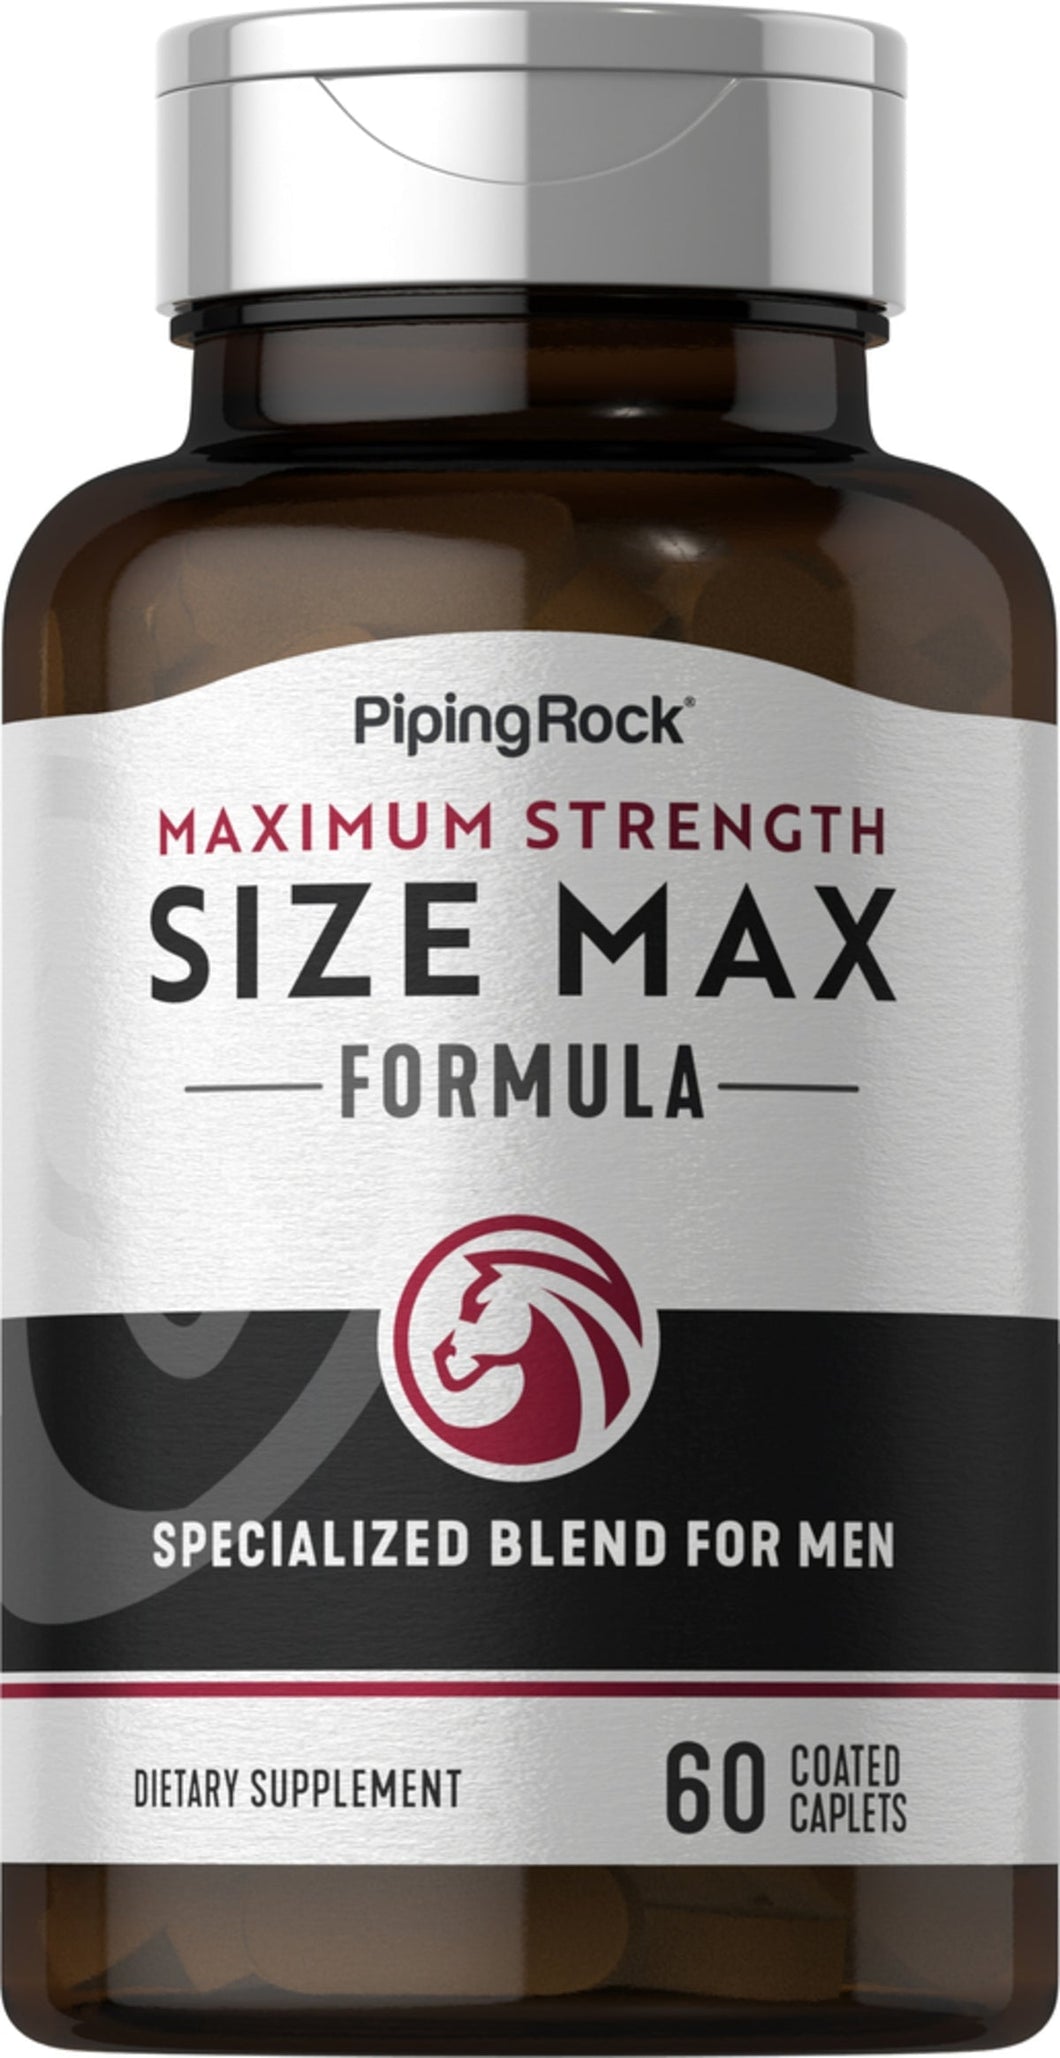 Size Max X By Piping rock supps247 